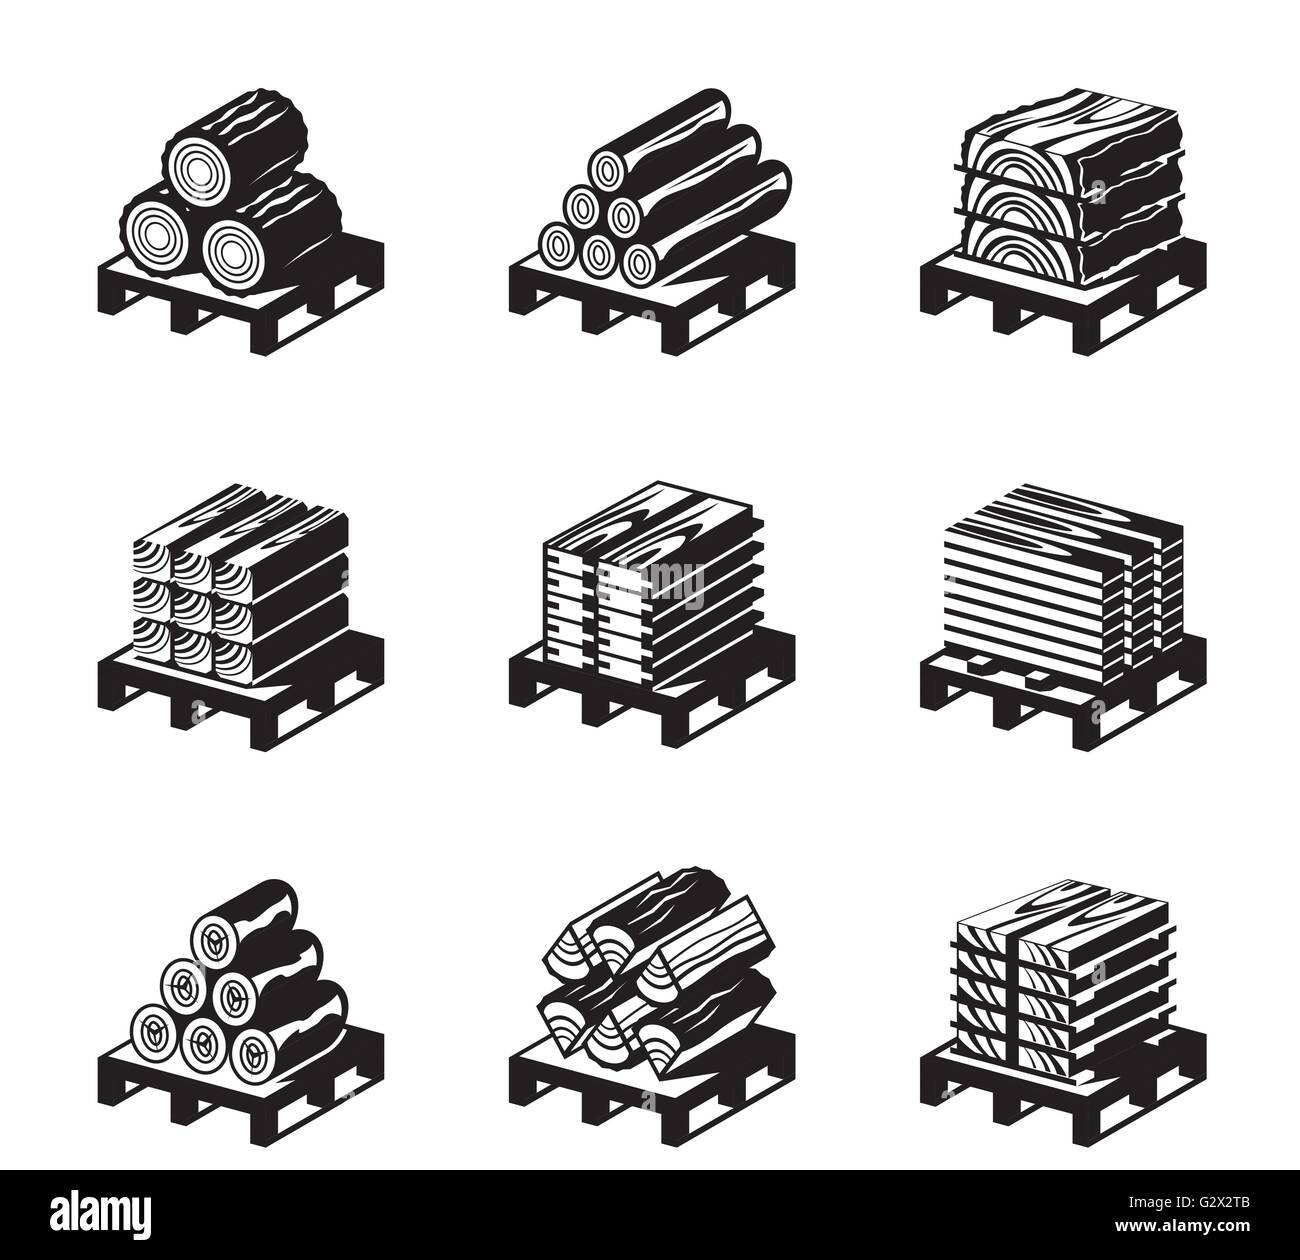 Wood materials icon set - vector illustration Stock Vector